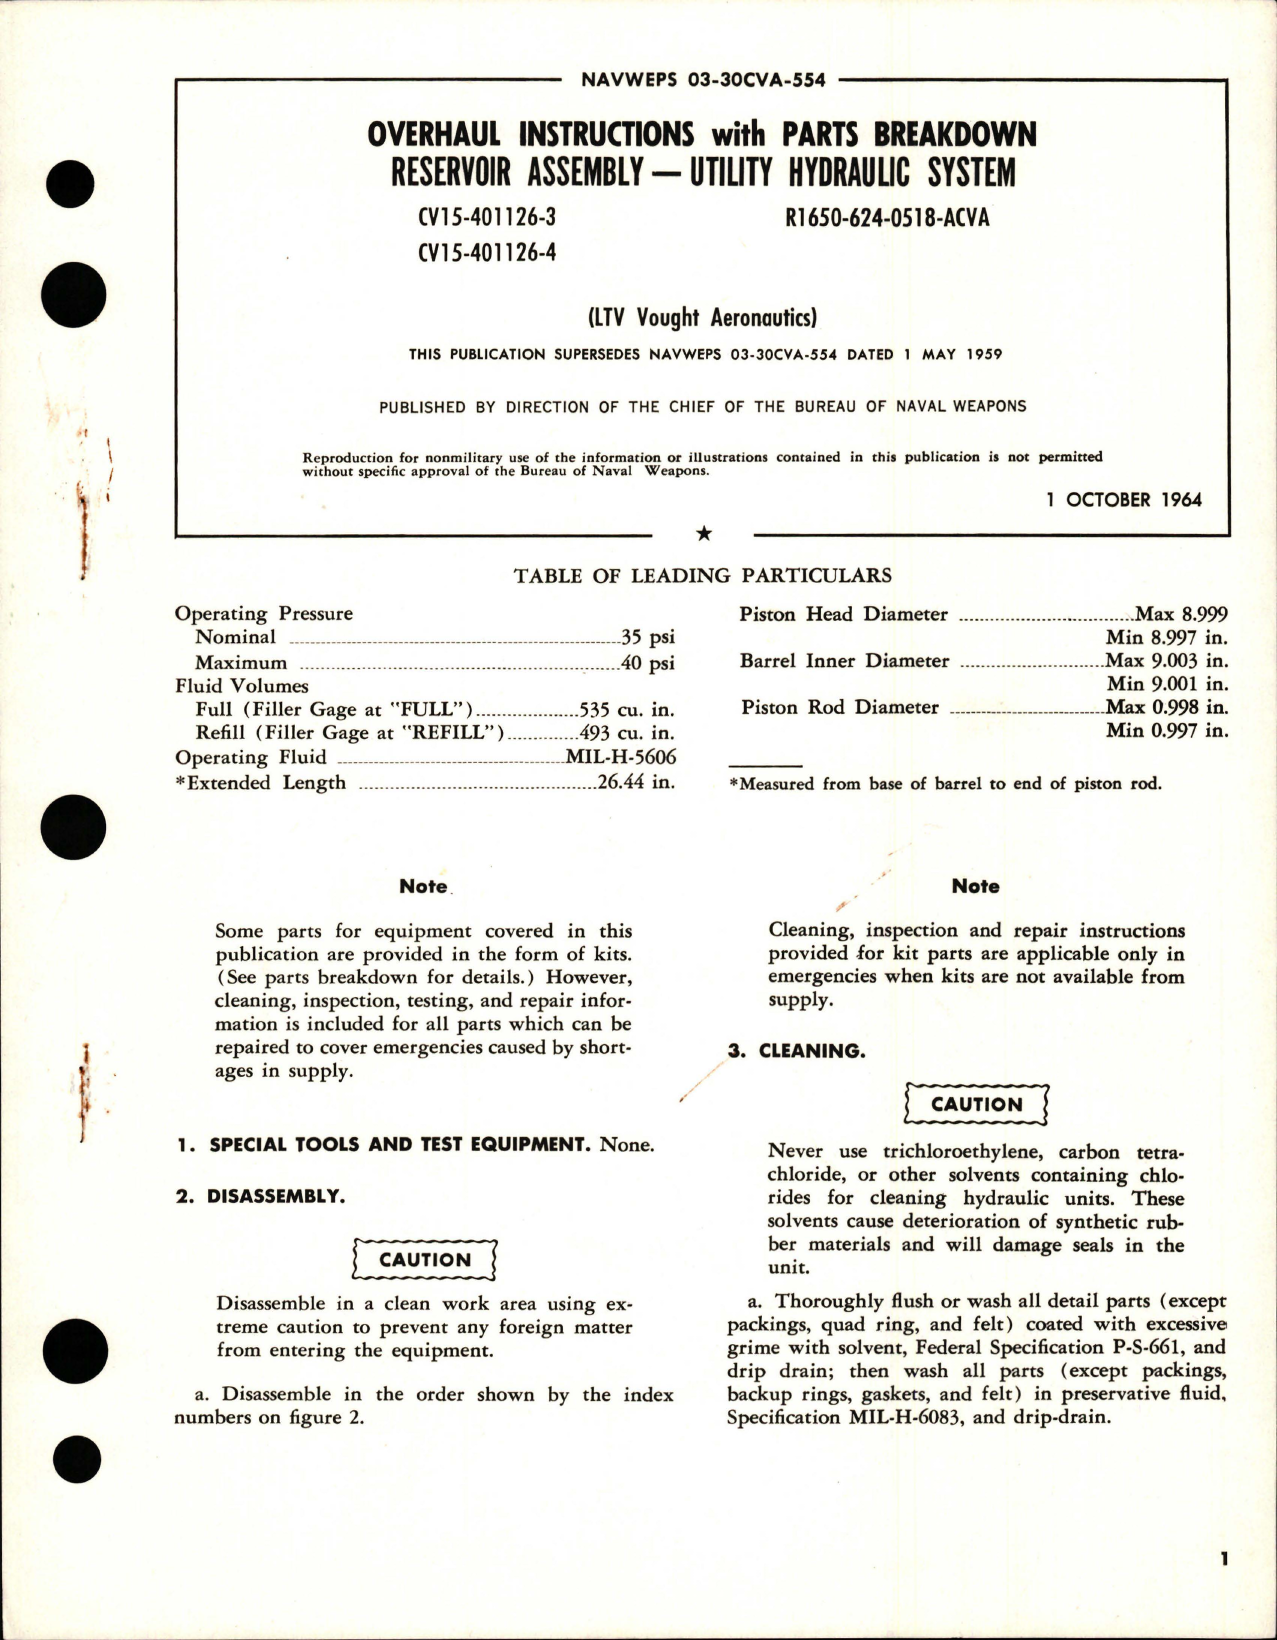 Sample page 1 from AirCorps Library document: Overhaul Instructions with Parts Breakdown for Utility Hydraulic System Reservoir Assembly - CV15-401126-3 and CV15-401126-4